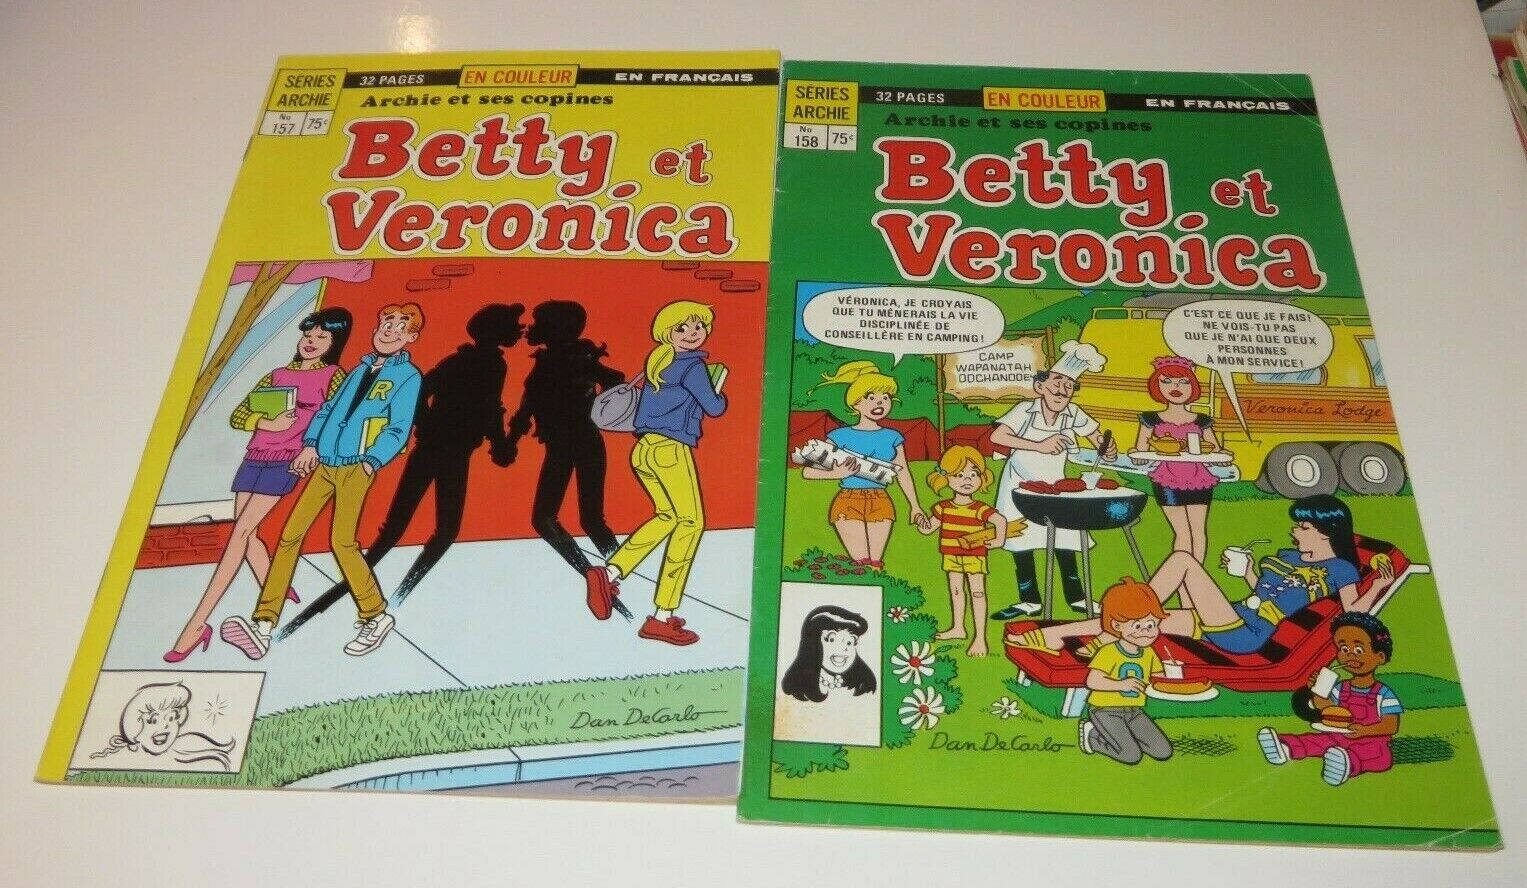 ARCHIE BETTY ET VERONICA #157-158  HERITAGE FRENCH COMIC LOT OF 2 1984 FREE**